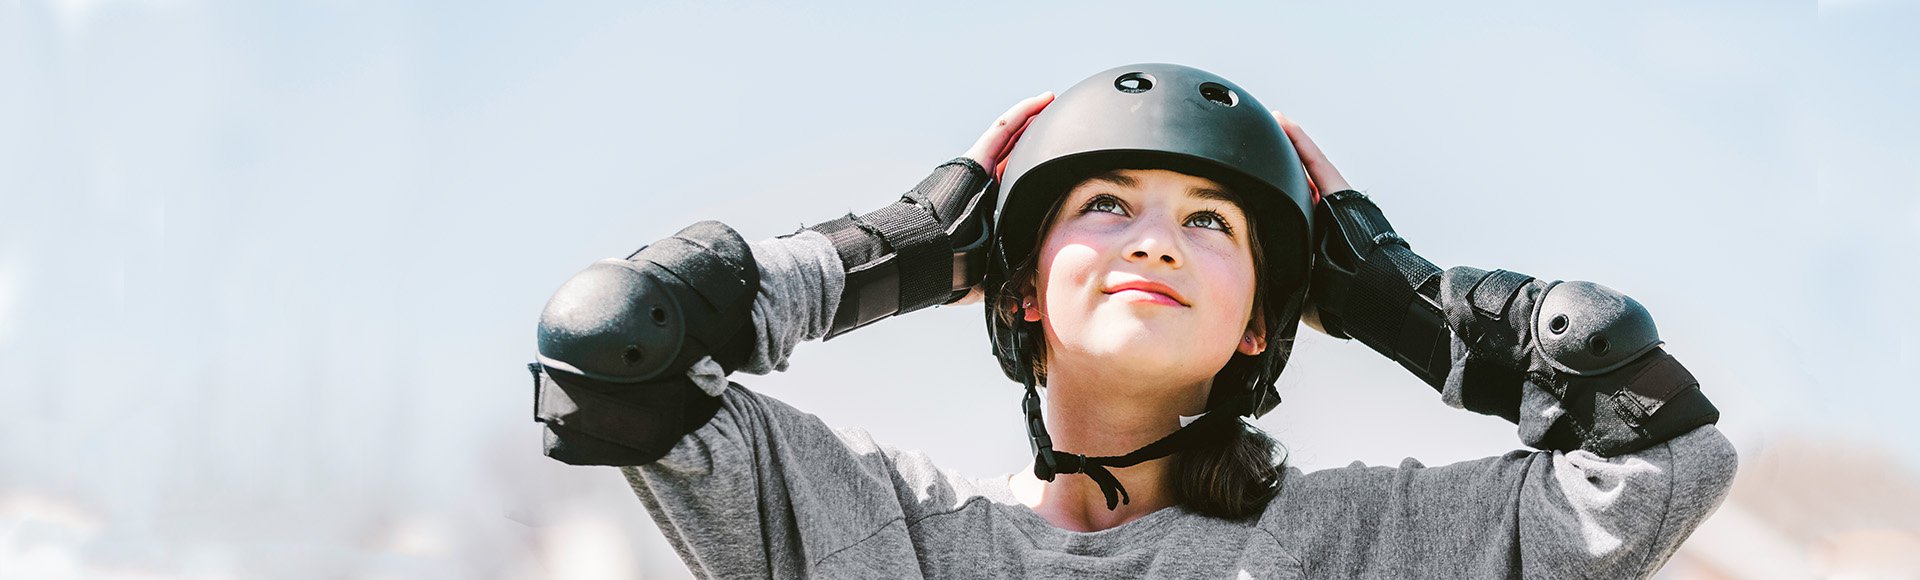 teenage girl wearing helmet and other skateboard protective gear, looks up at sky